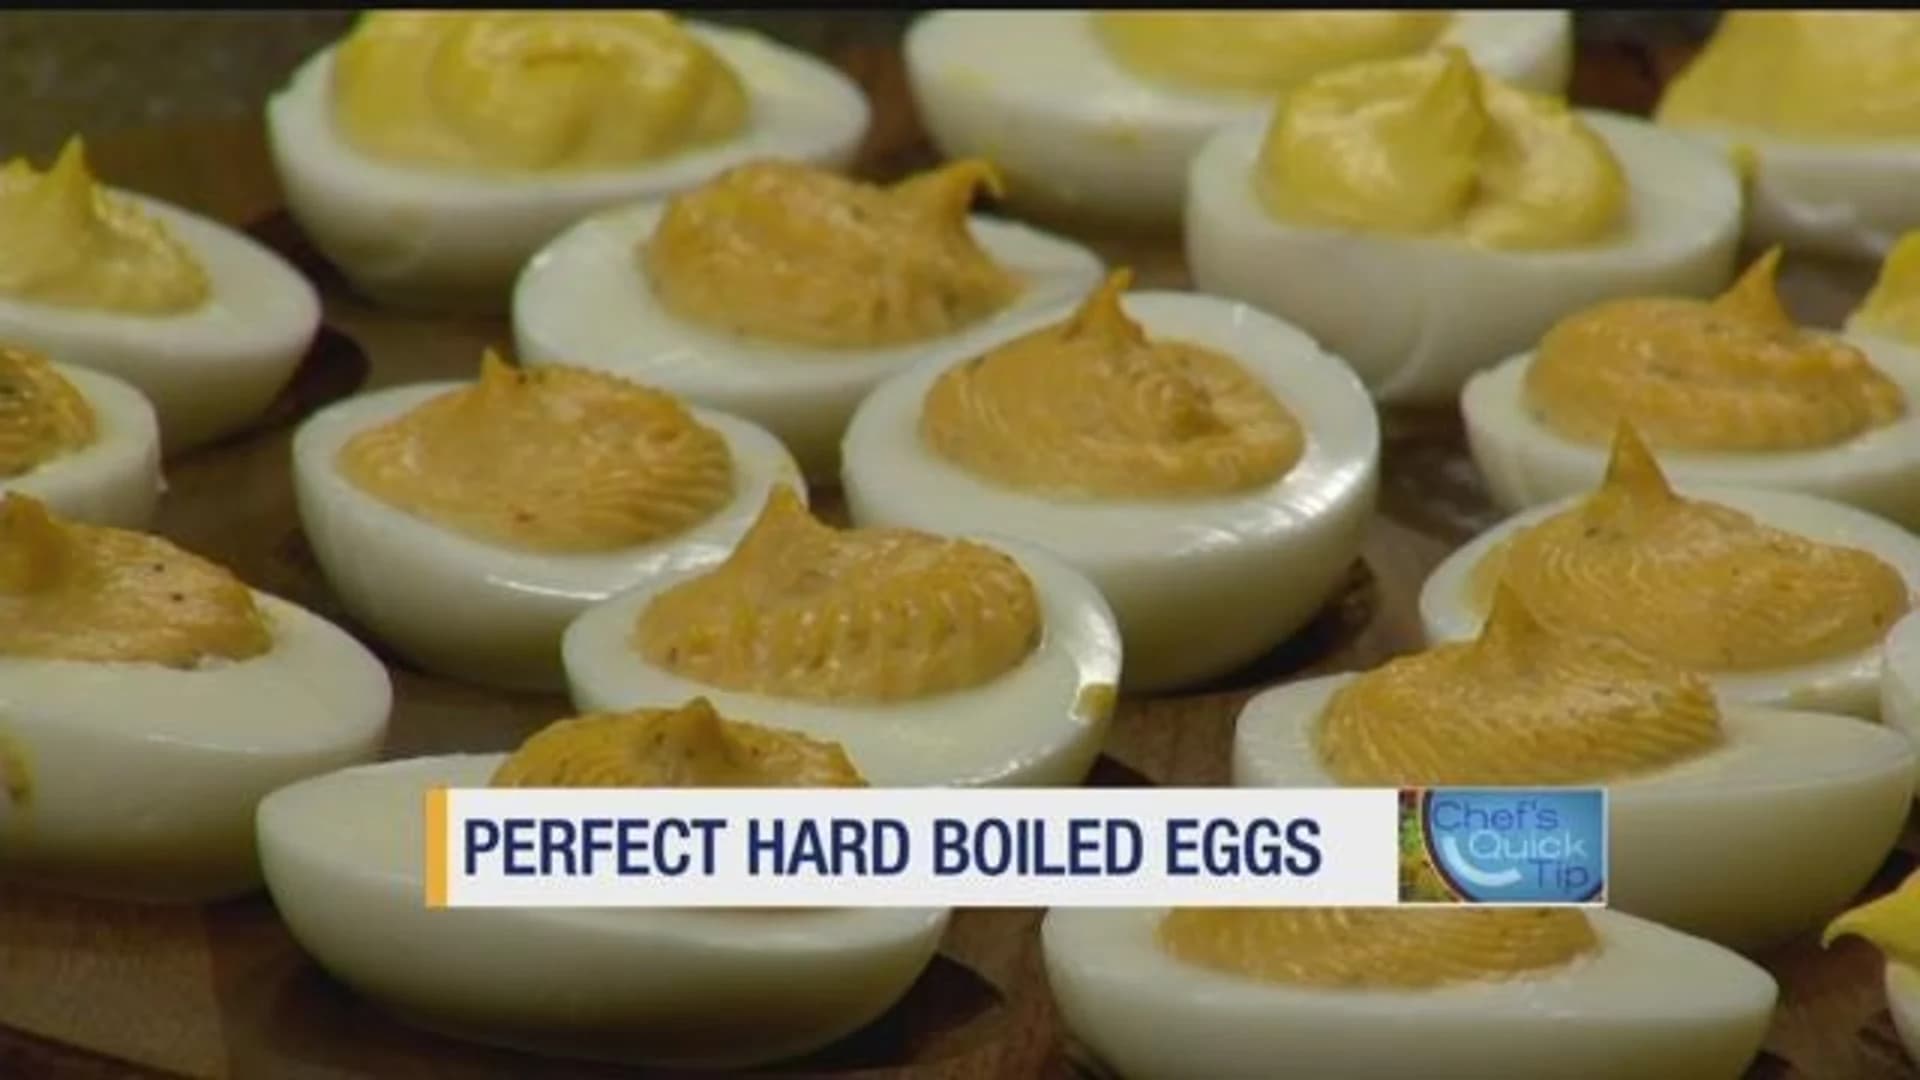 Chef's Quick Tip: Hard boiled eggs